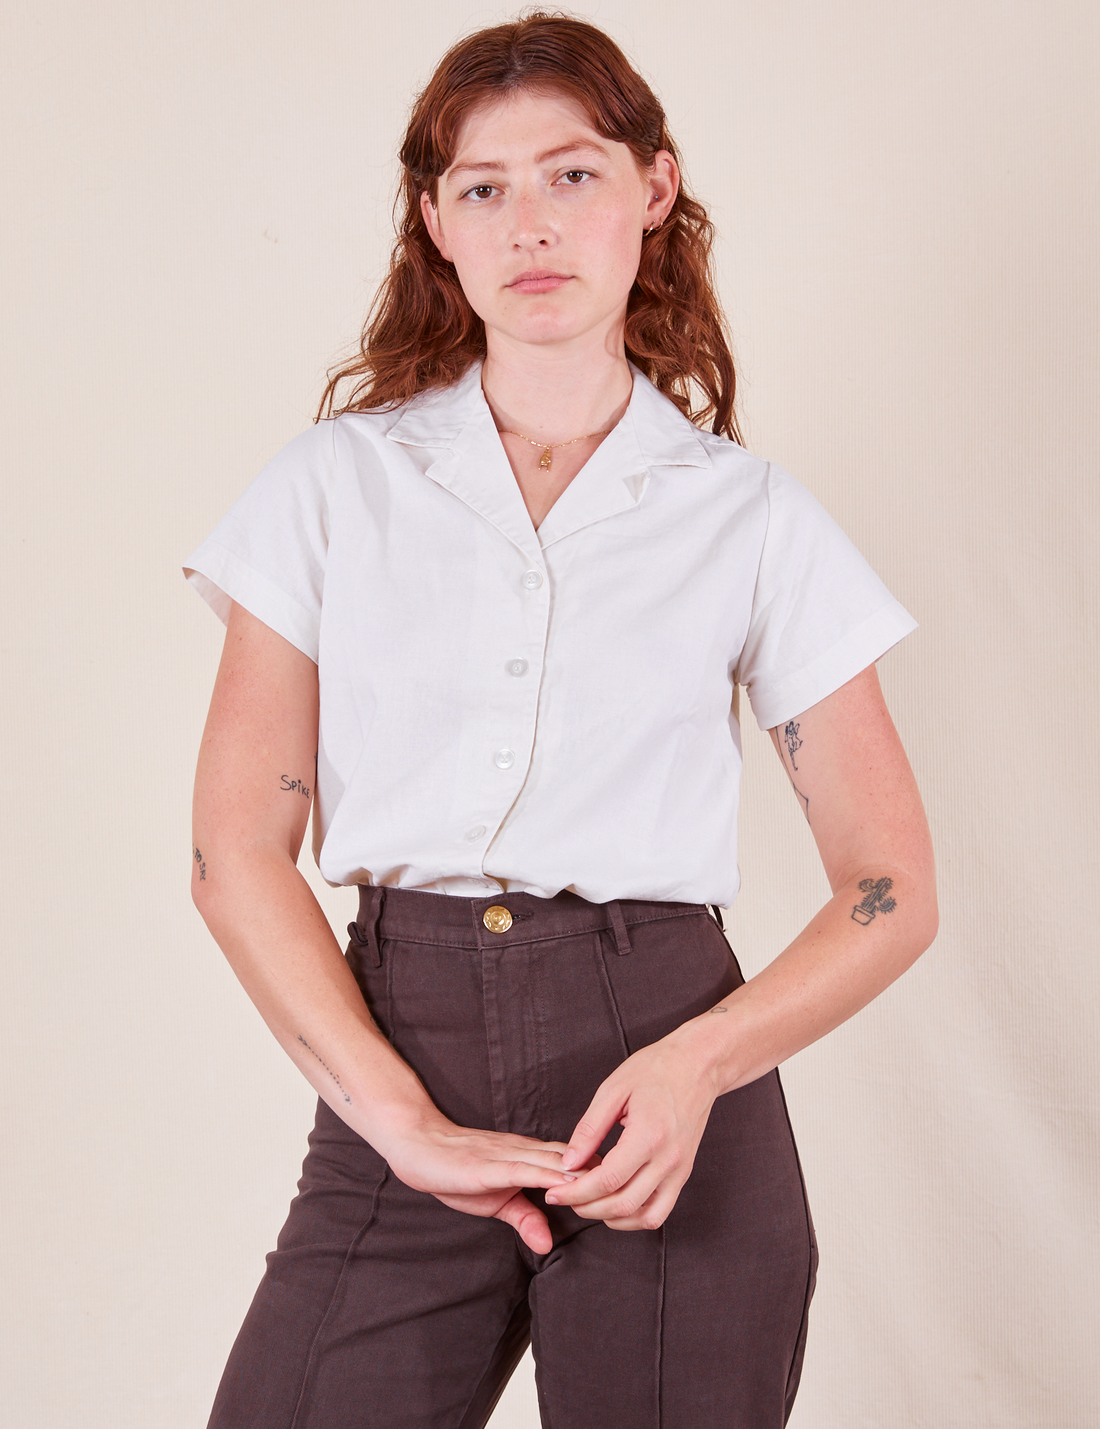 Alex is wearing Pantry Button-Up in Vintage Tee White tucked into espresso brown Western Pants